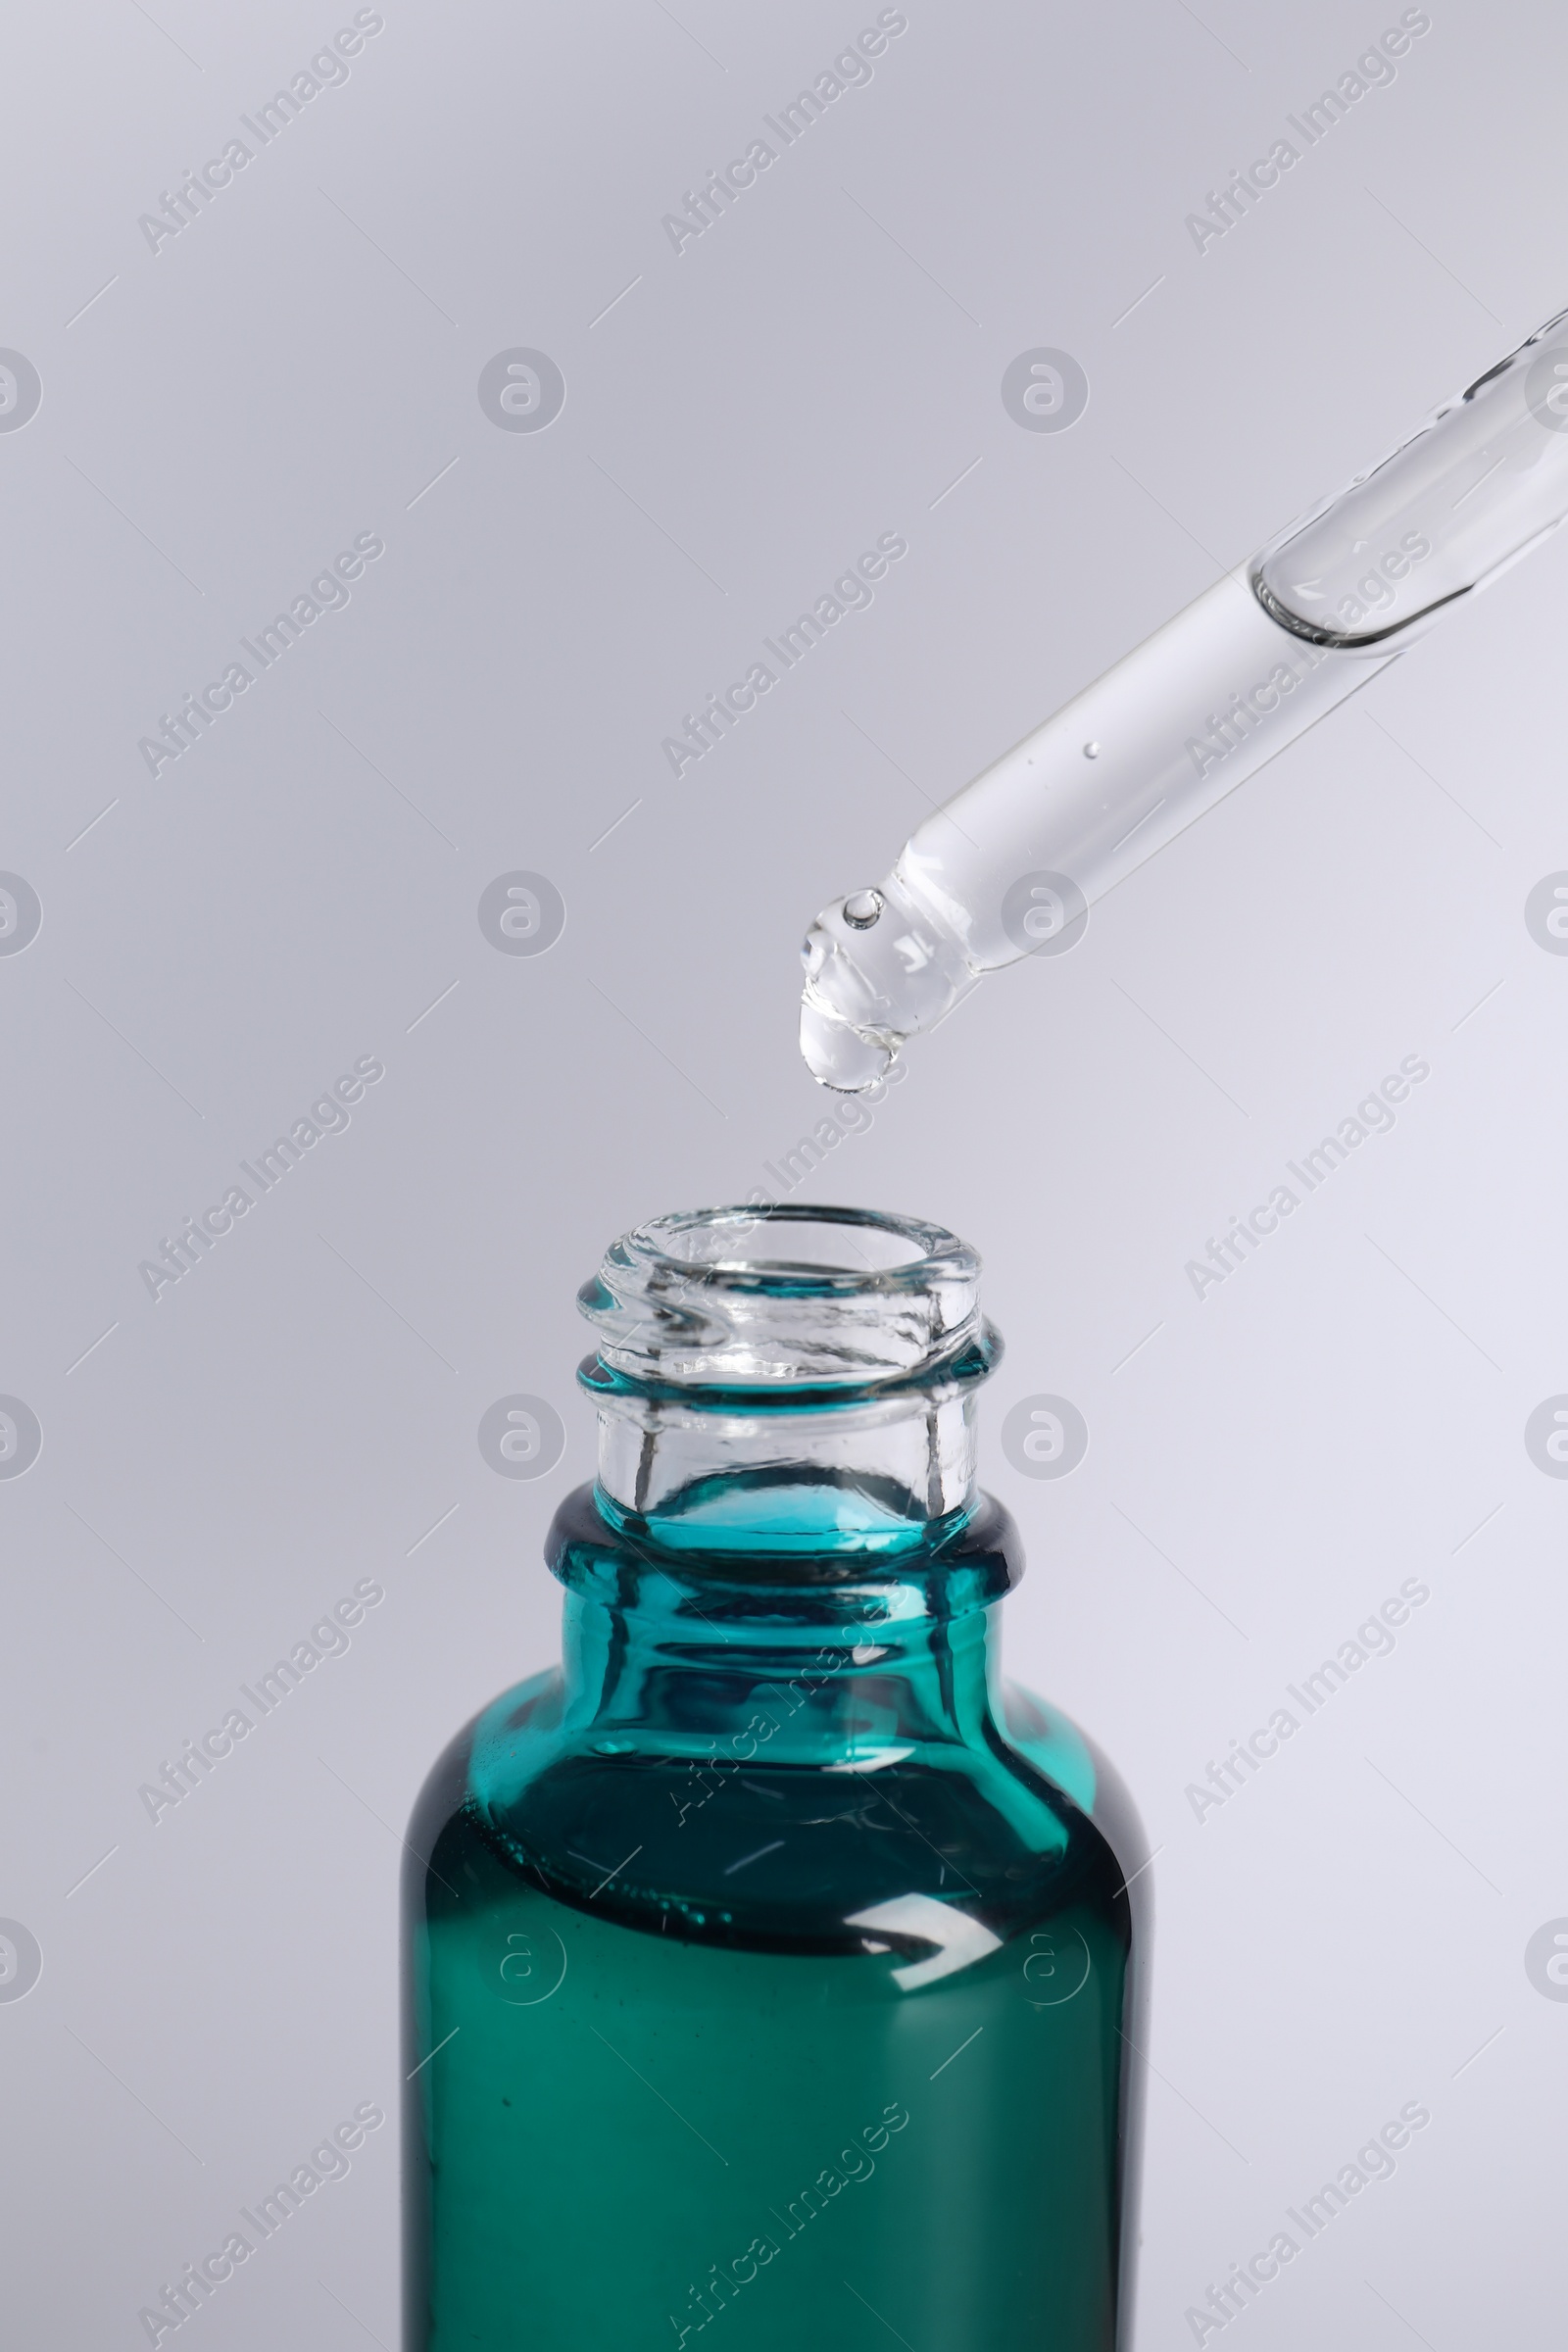 Photo of Dripping cosmetic serum from pipette into bottle on light grey background